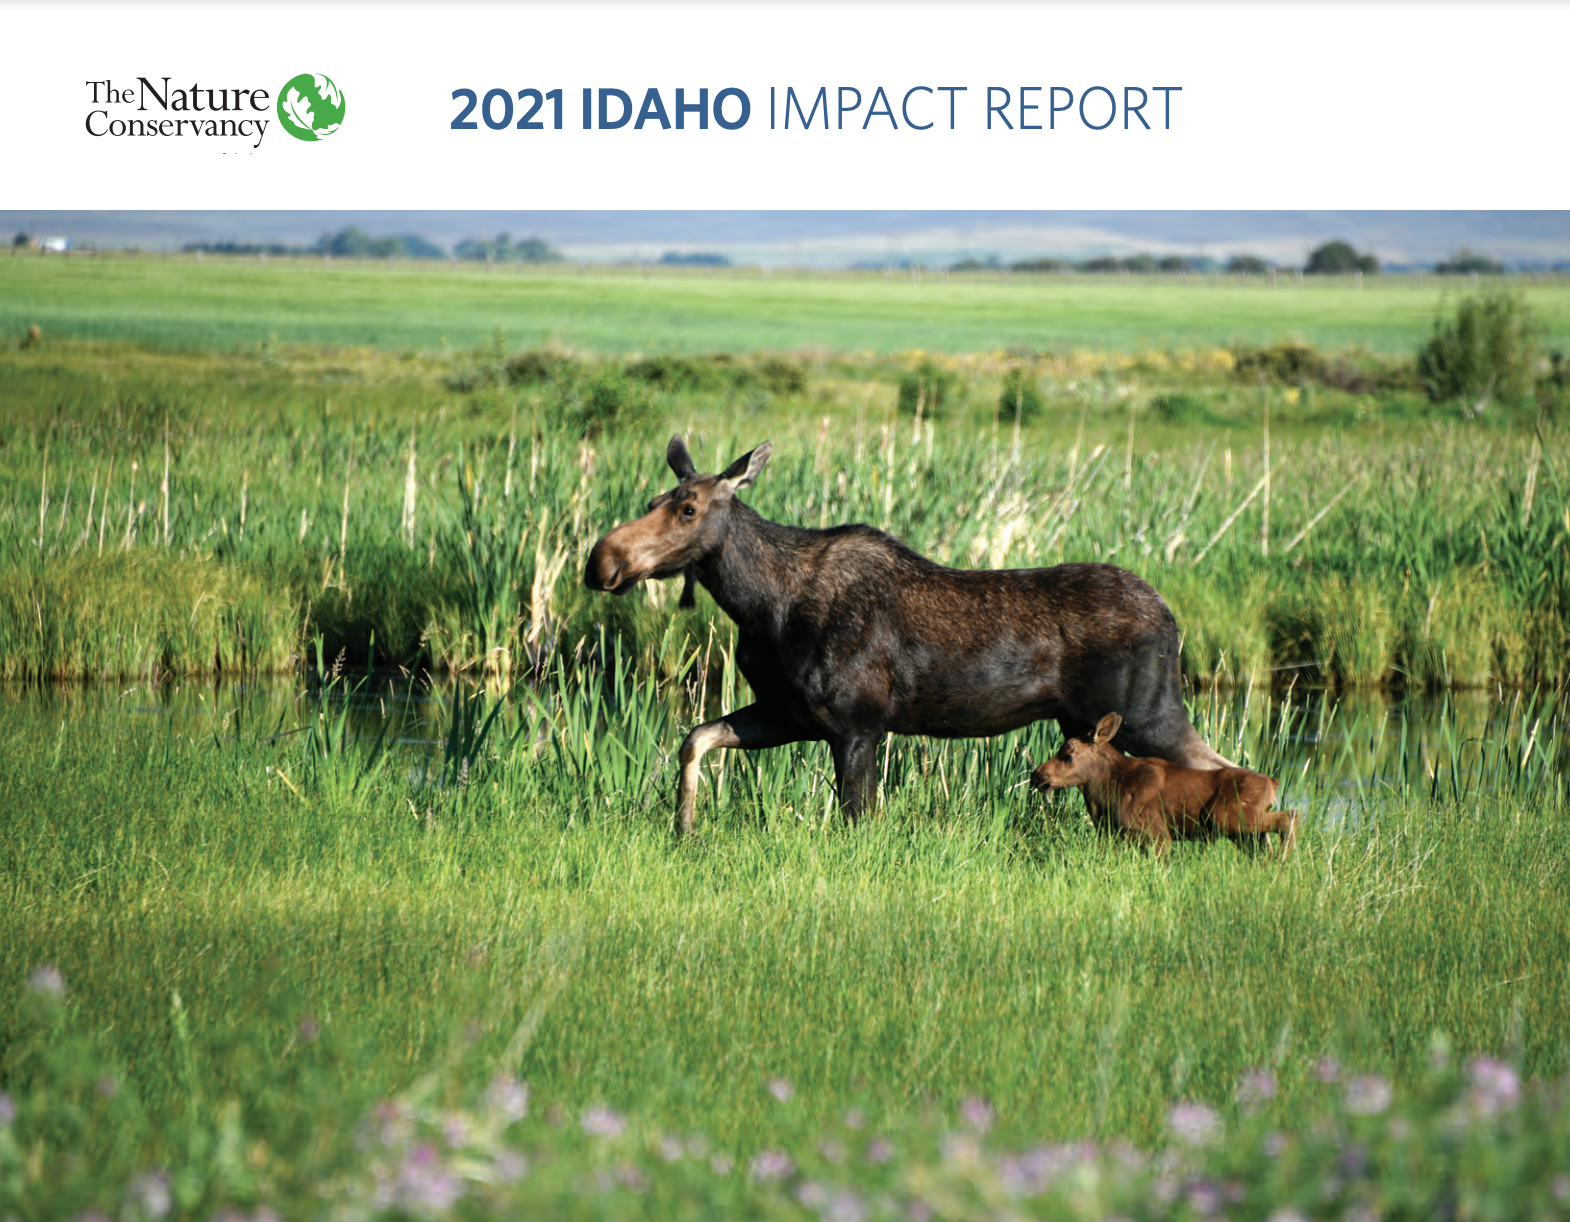 2021 Idaho Impact Report cover image of a Mooose.